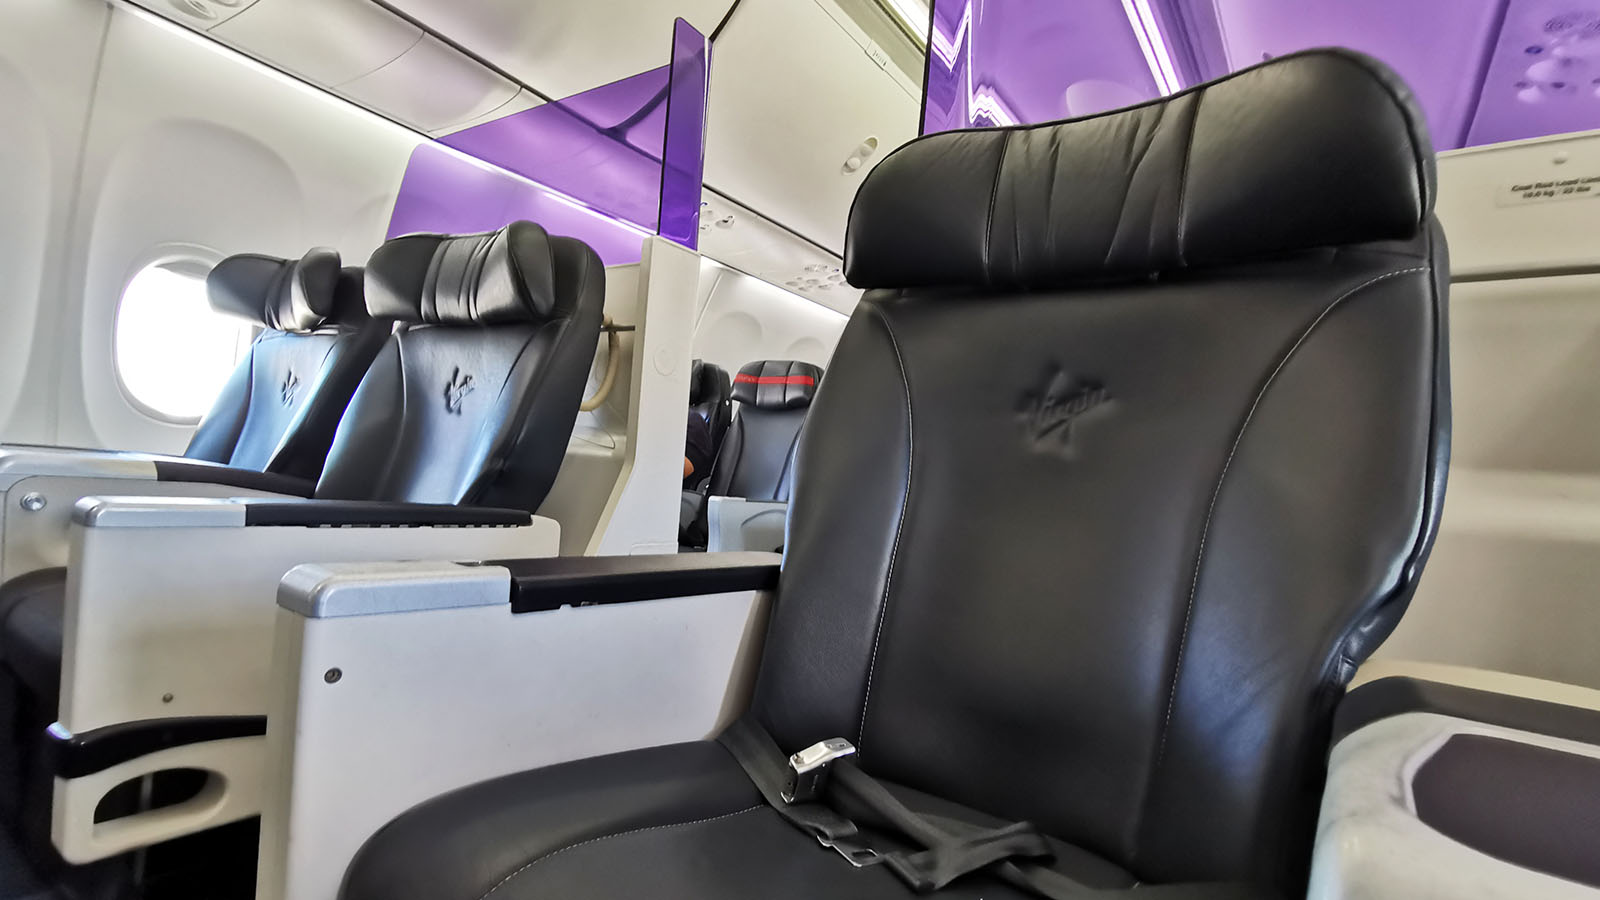 Bulkhead wall between Business Class and Economy on Virgin Australia's Boeing 737